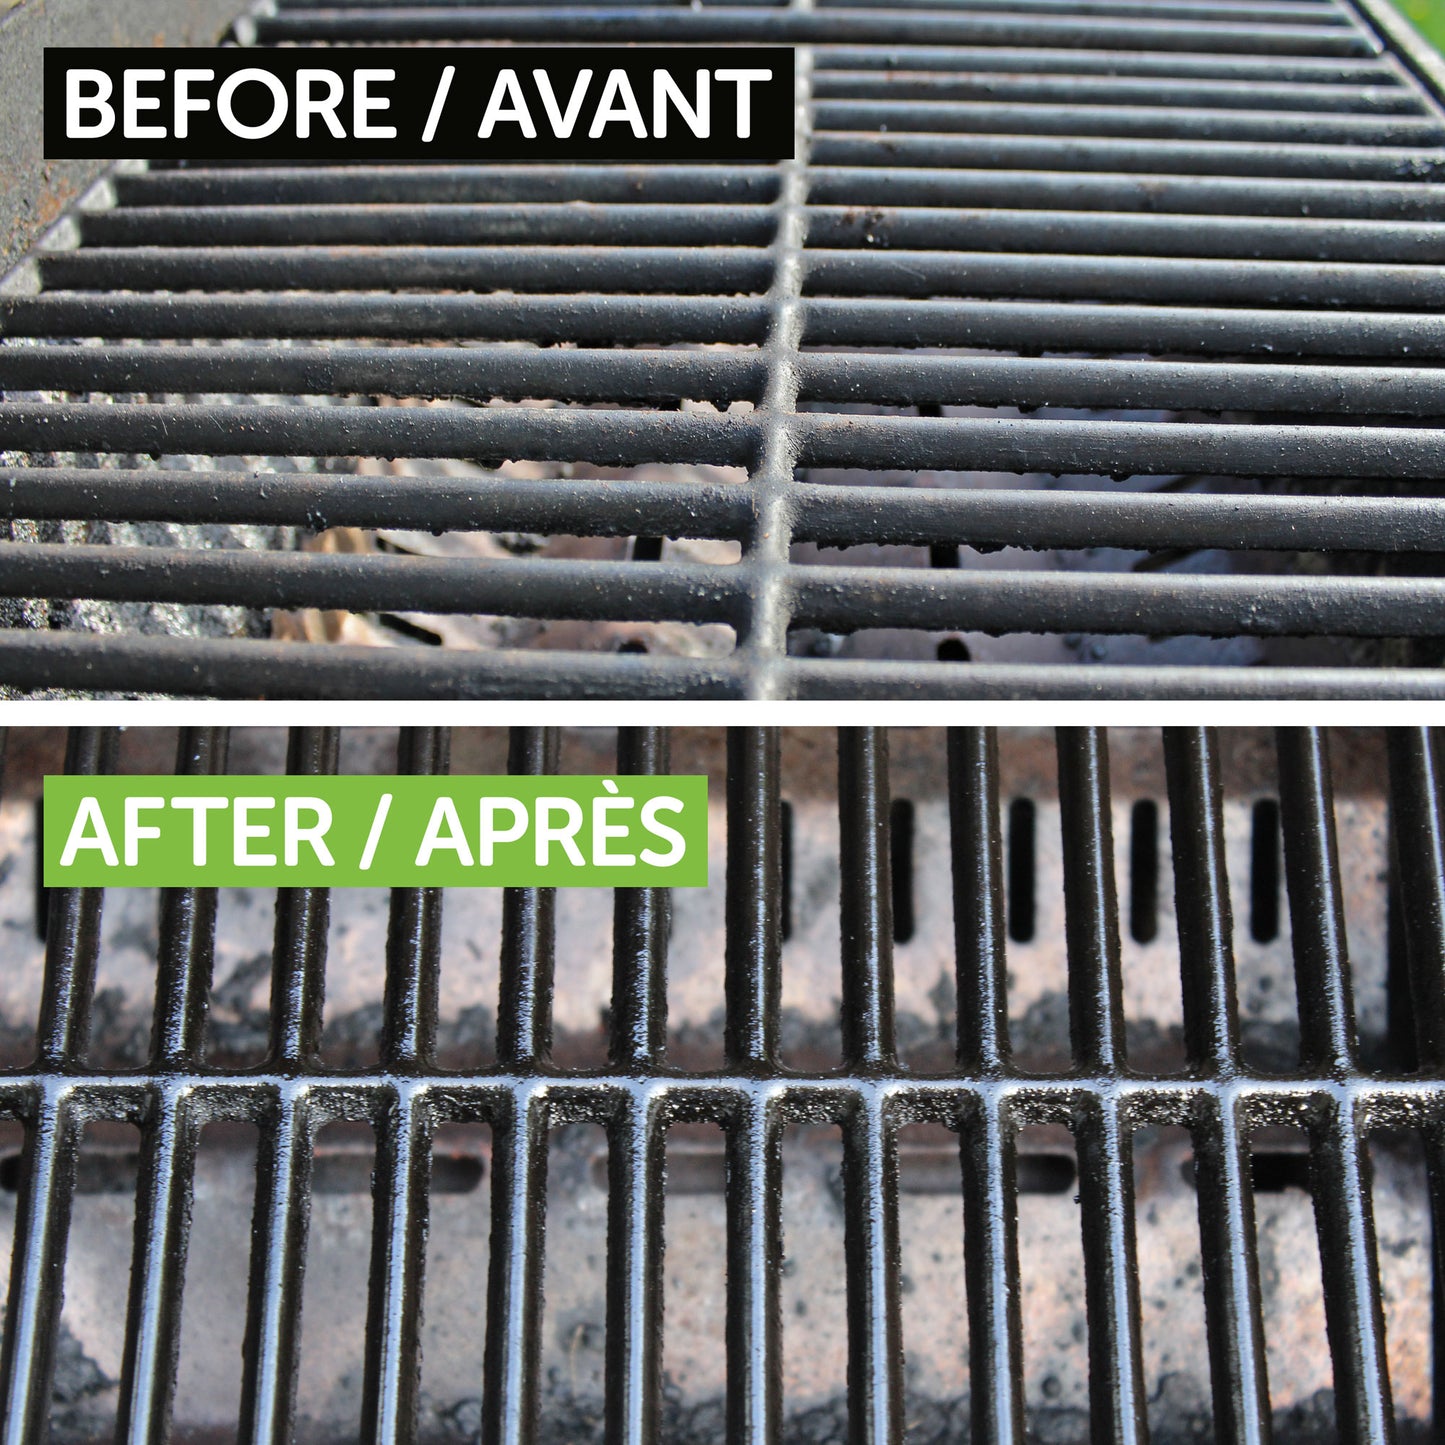 BBQ Cleaning Oil Before & After Grill